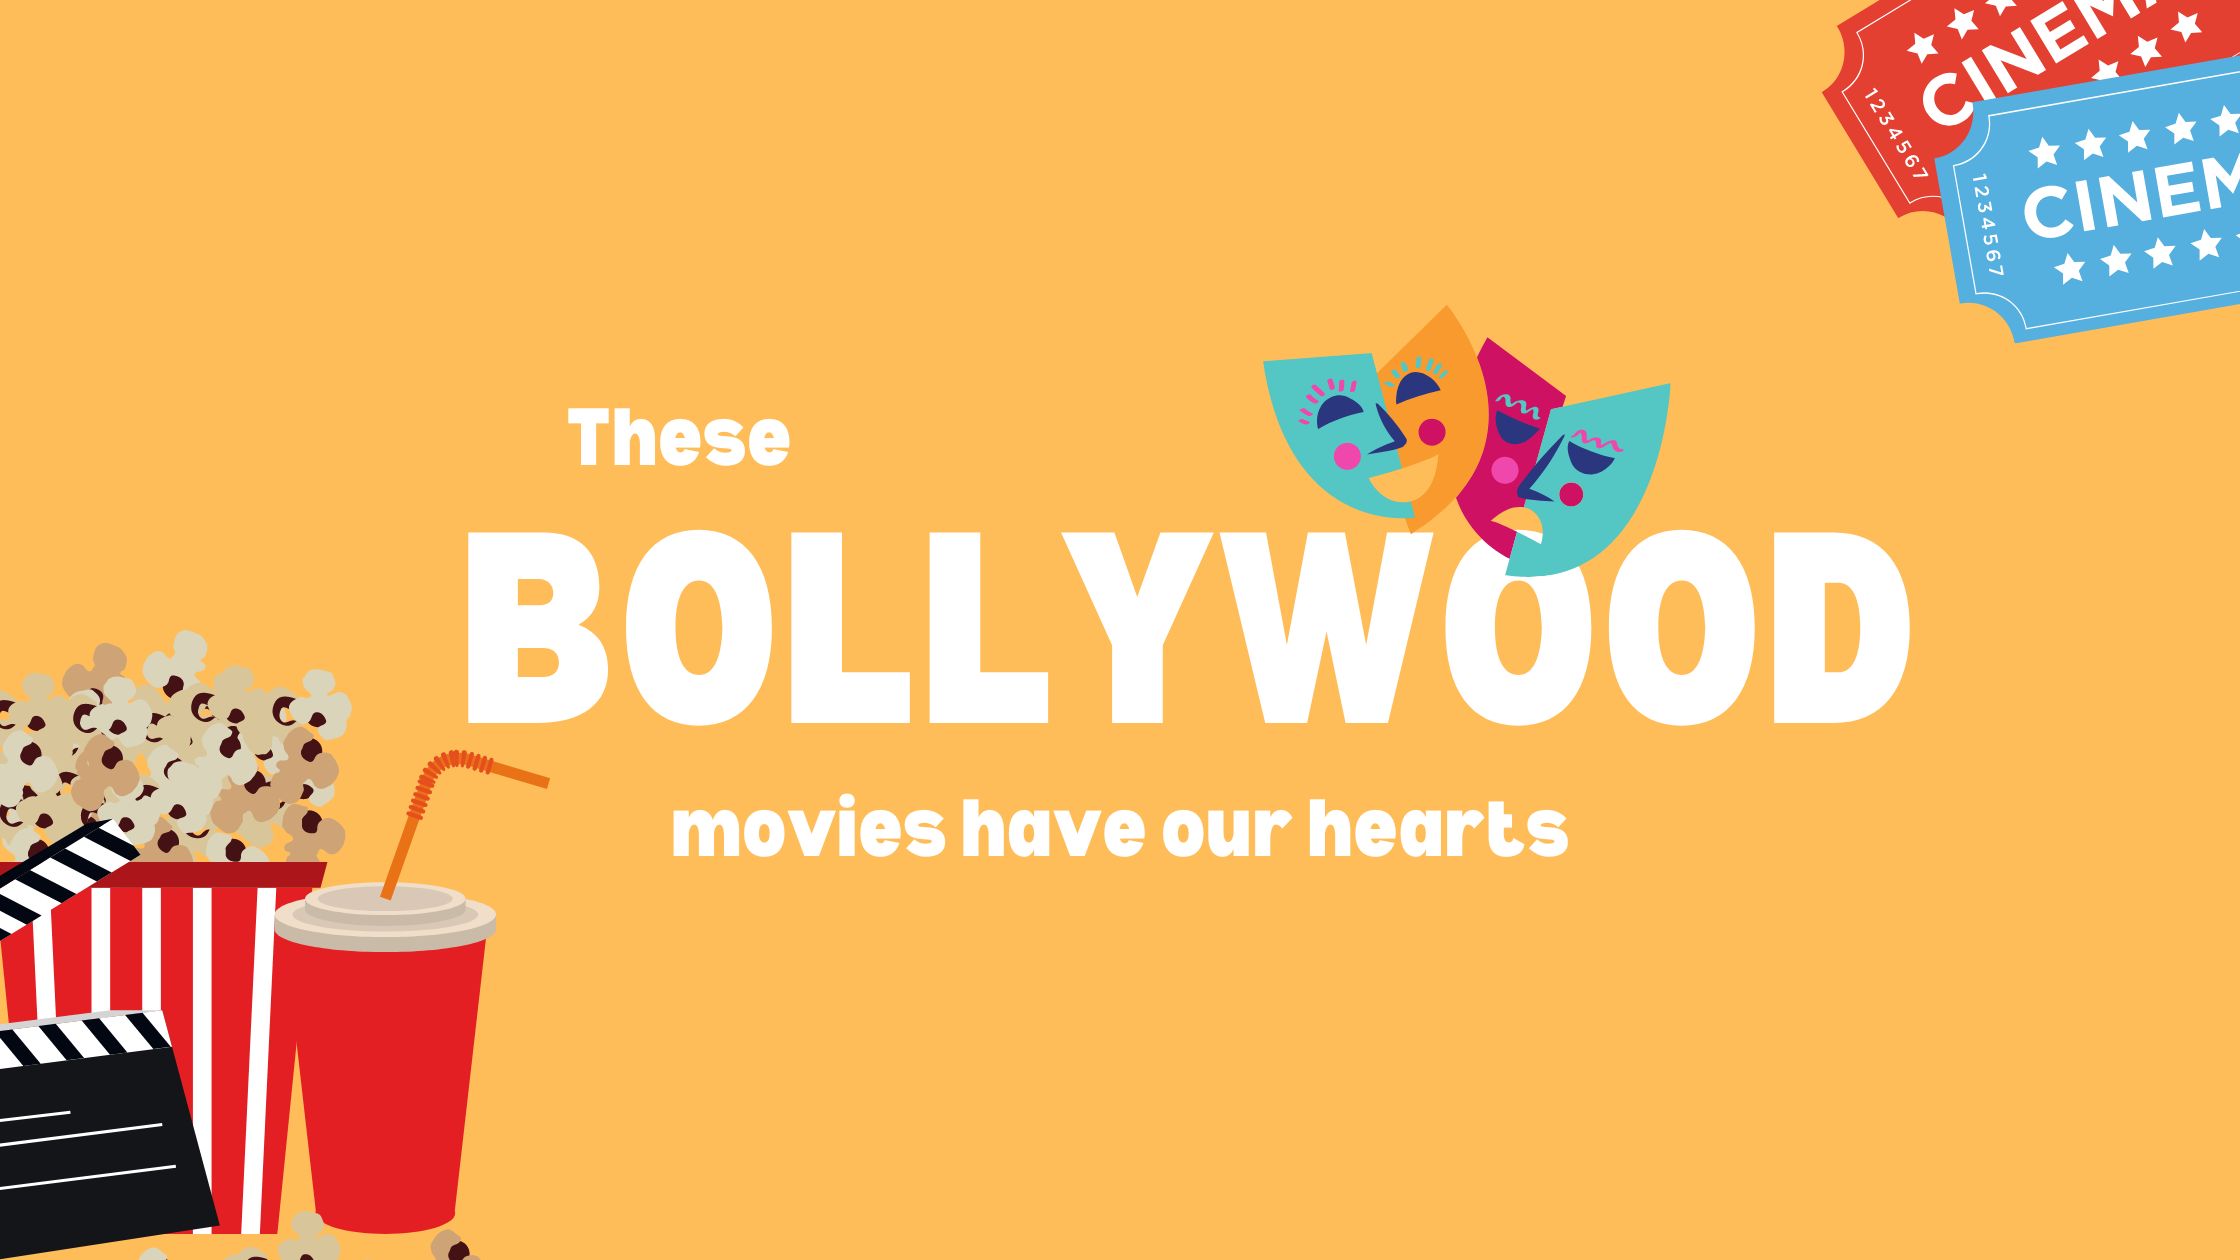 These Bollywood movies have our hearts